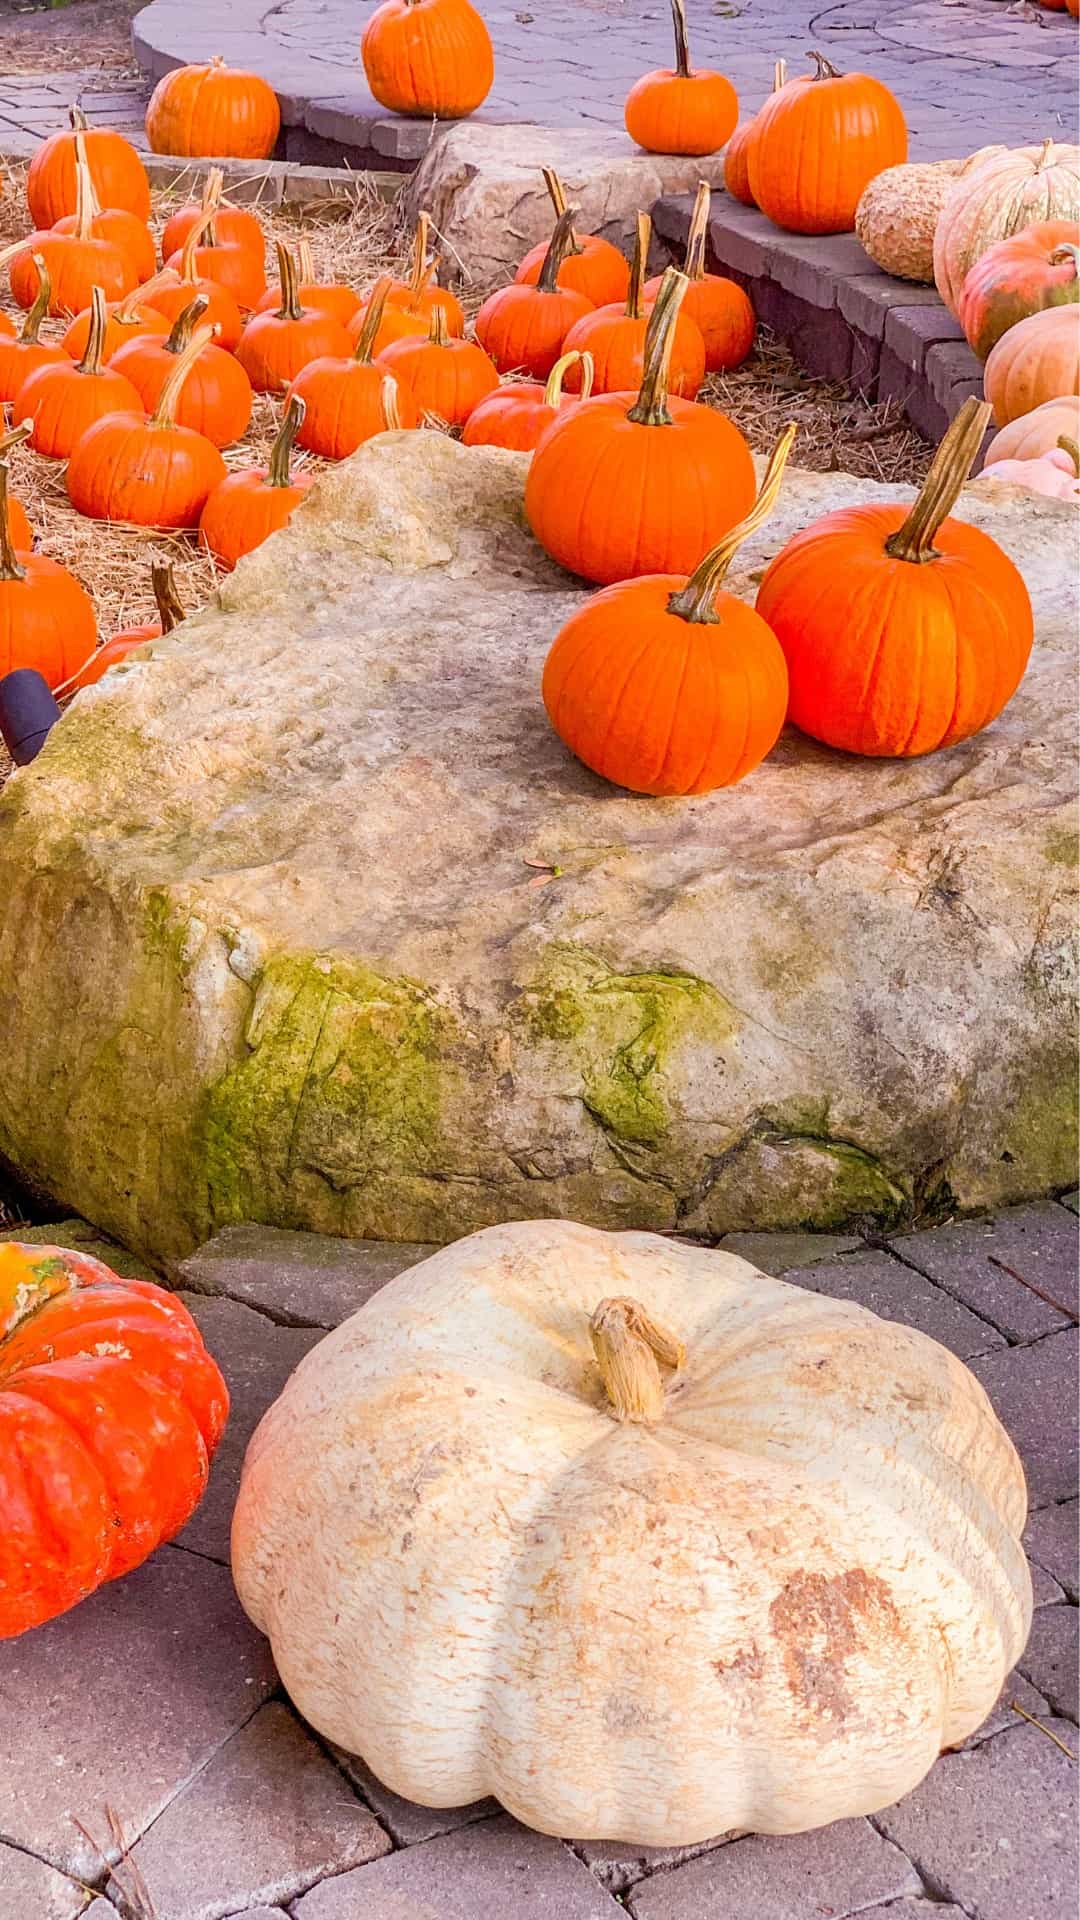 Pumpkins and squash on a stone bench - Fall